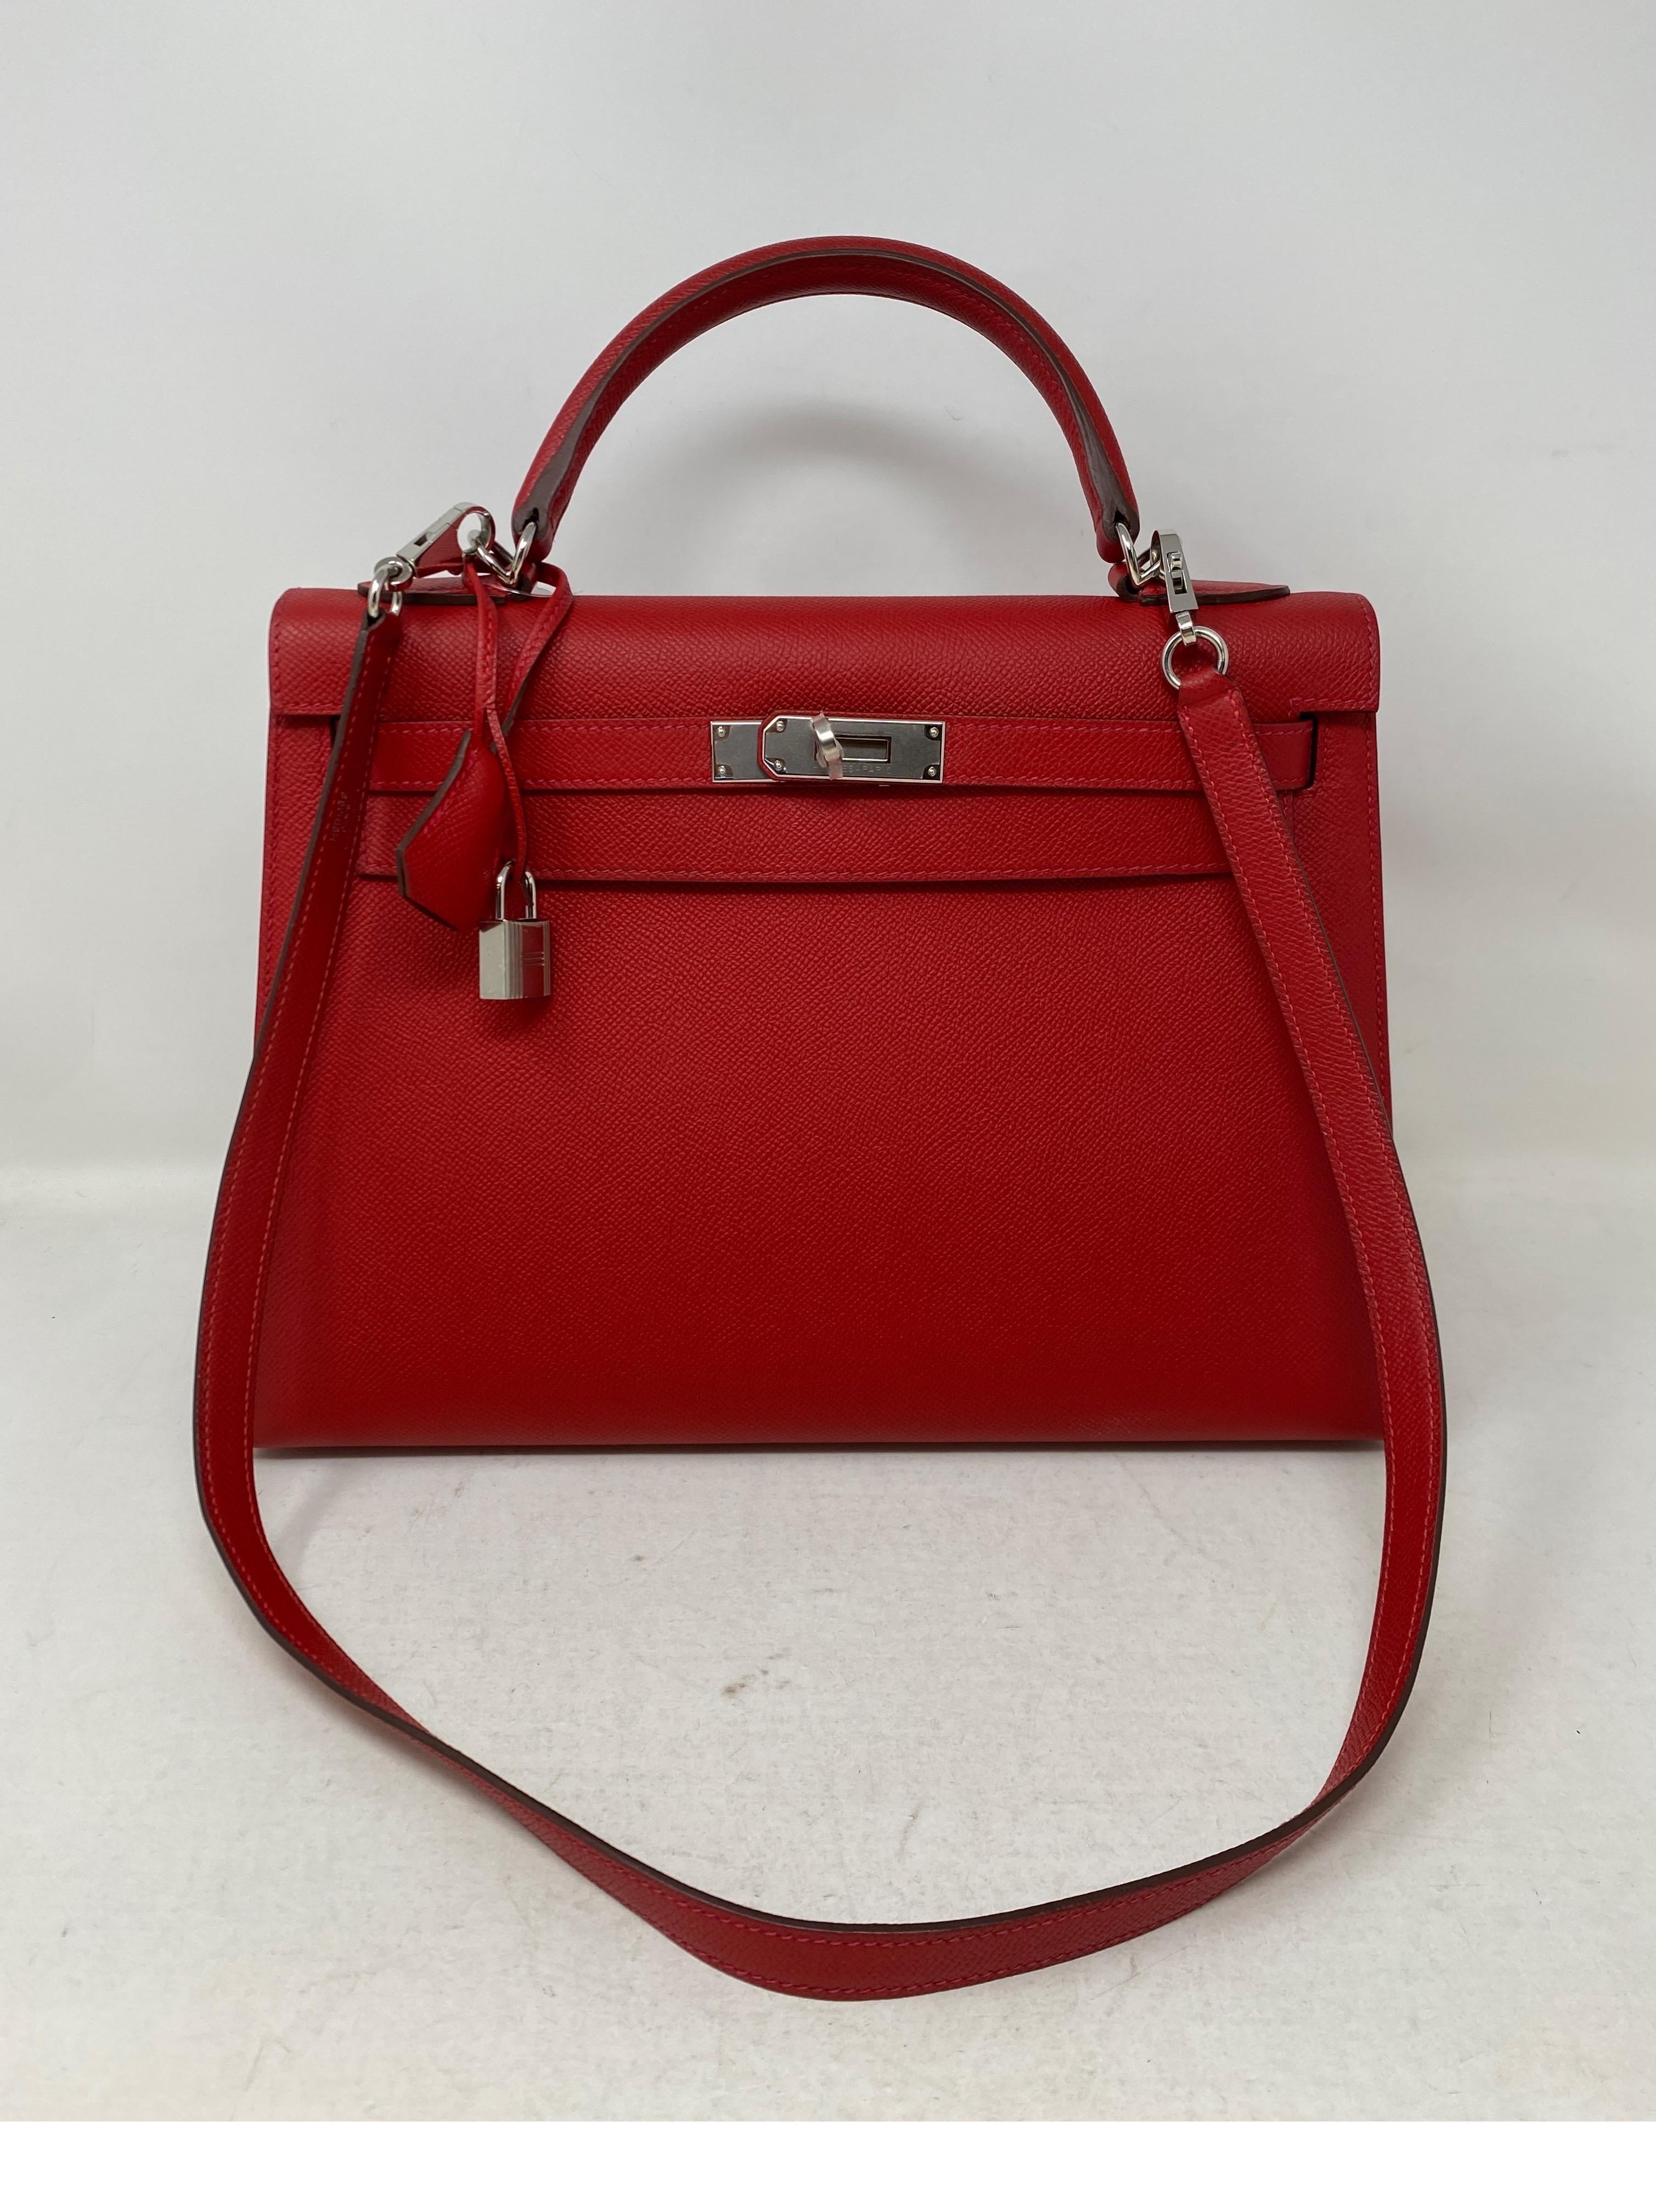 Hermes Red Rouge Casaque Kelly 32 Bag. Palladium silver hardware. New condition. Plastic still on hardware. Epsom leather and sellier. Highly coveted sellier and size 32. Beautiful red leather. Includes clochette, lock, keys, and dust bag.